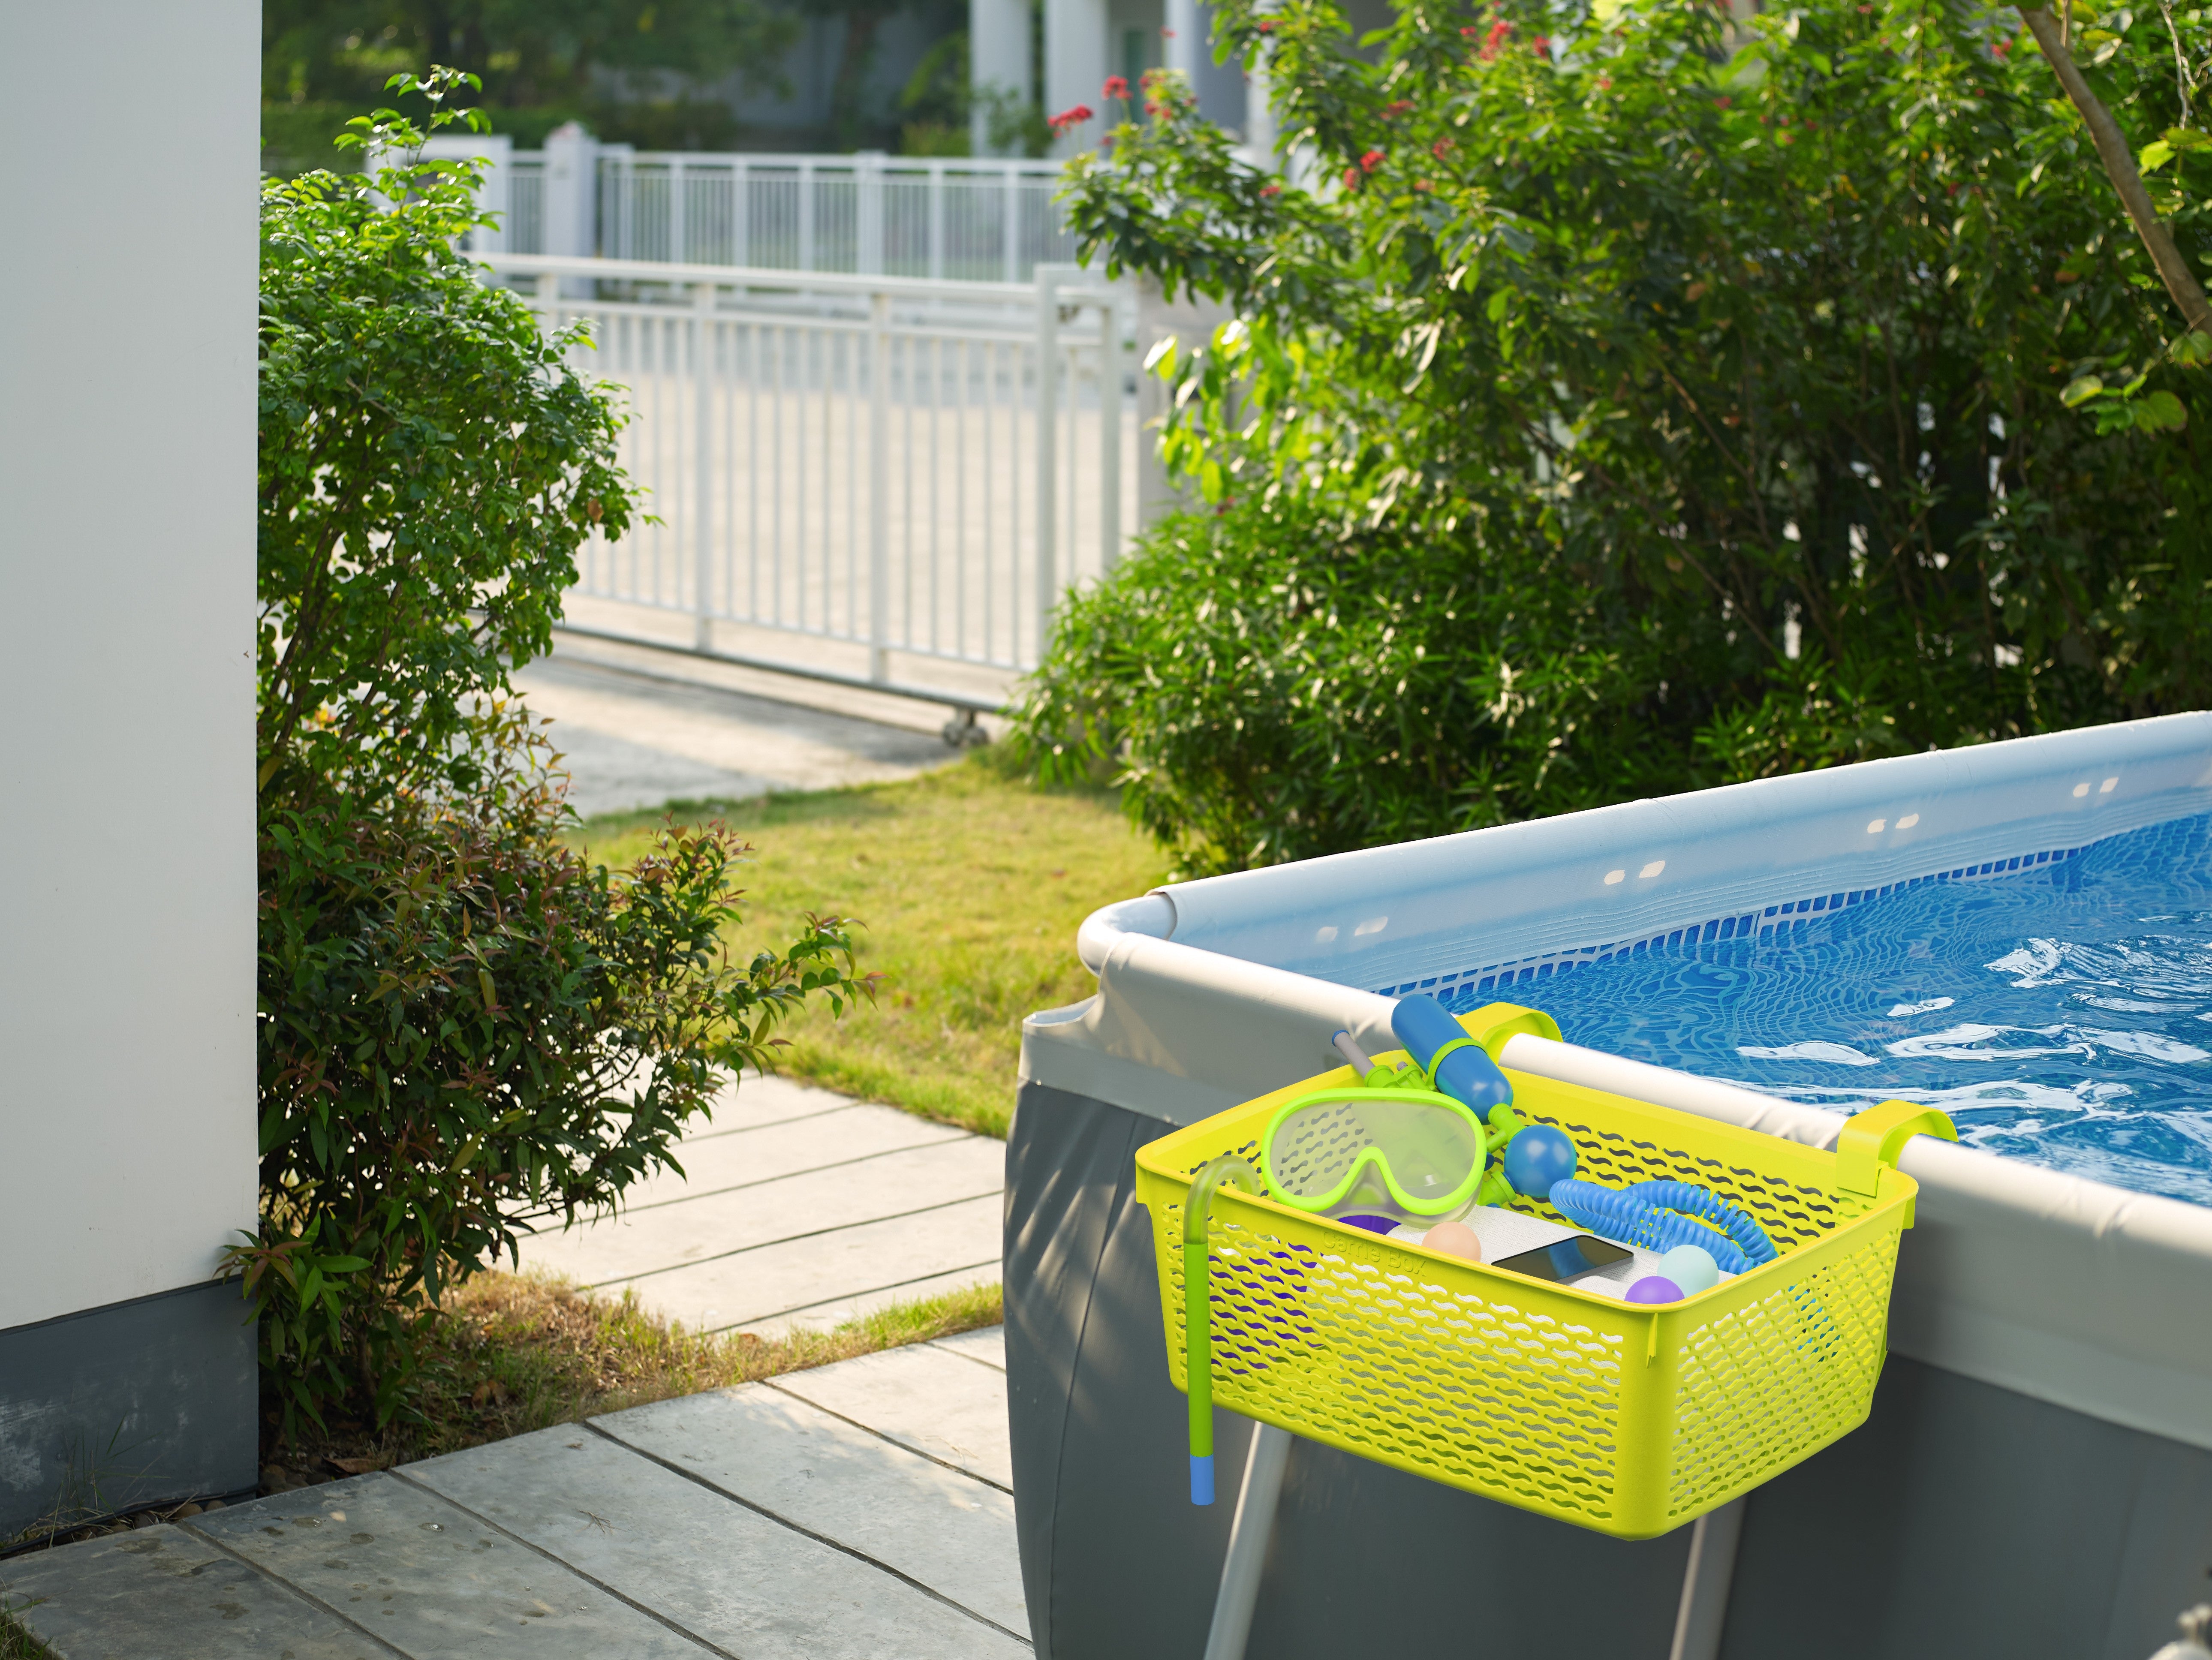 Carrie Box Poolside Storage Basket For Above Ground Pools Made From Recycled Plastic